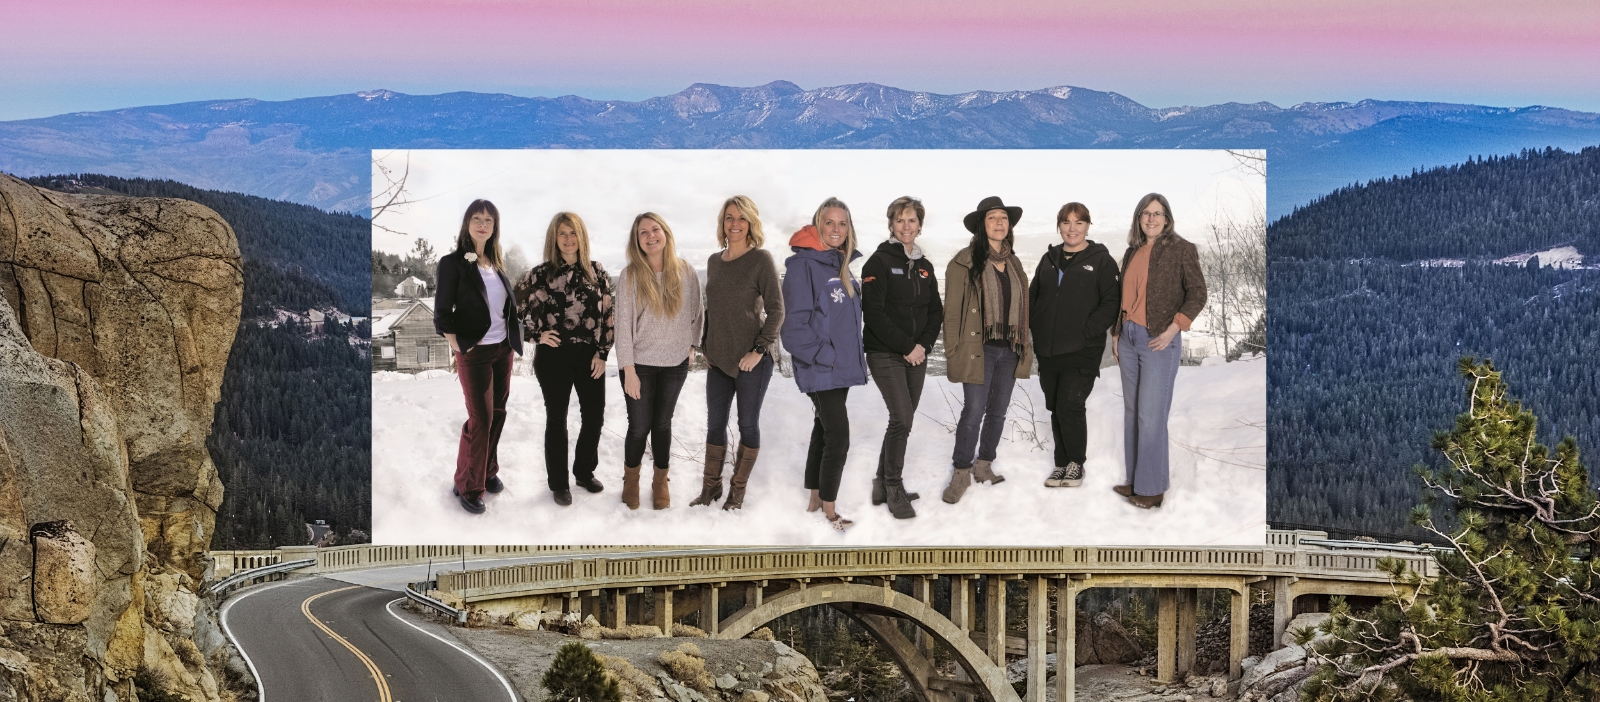 Women at the Top: High-Power Leaders in Our High-Altitude Town